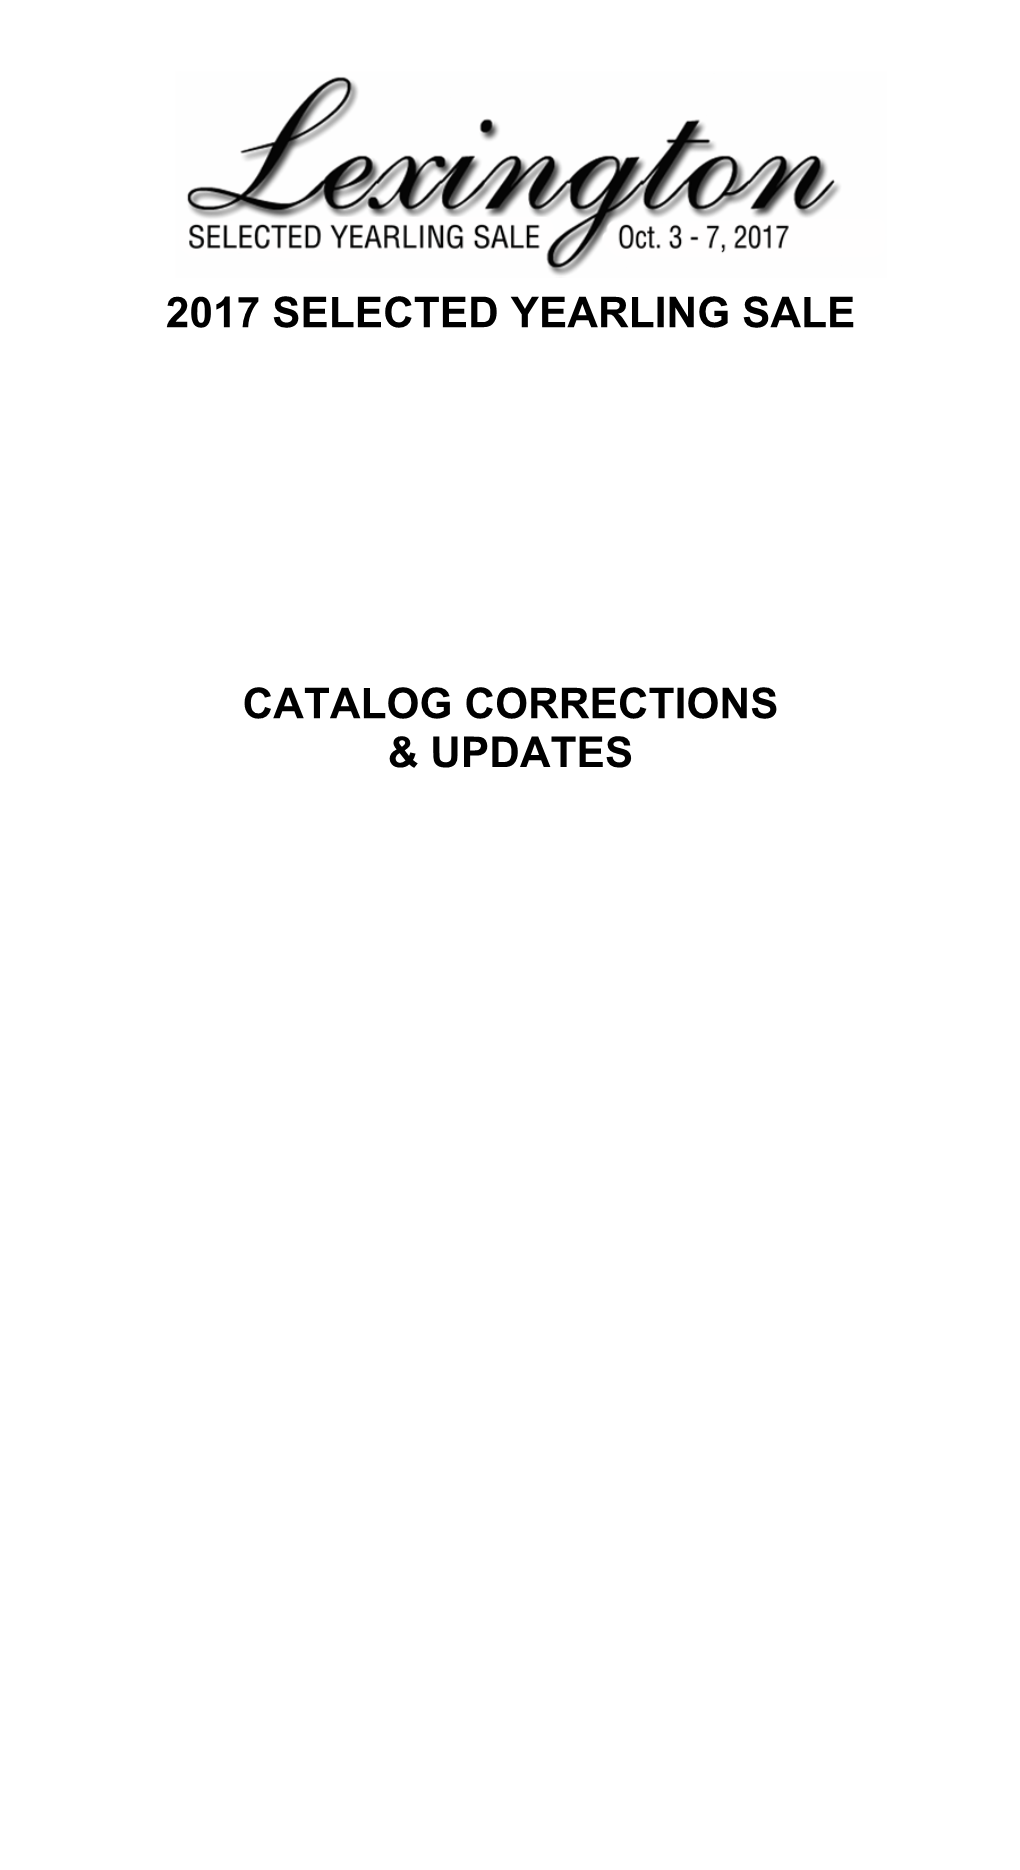 2017 Selected Yearling Sale Catalog Corrections